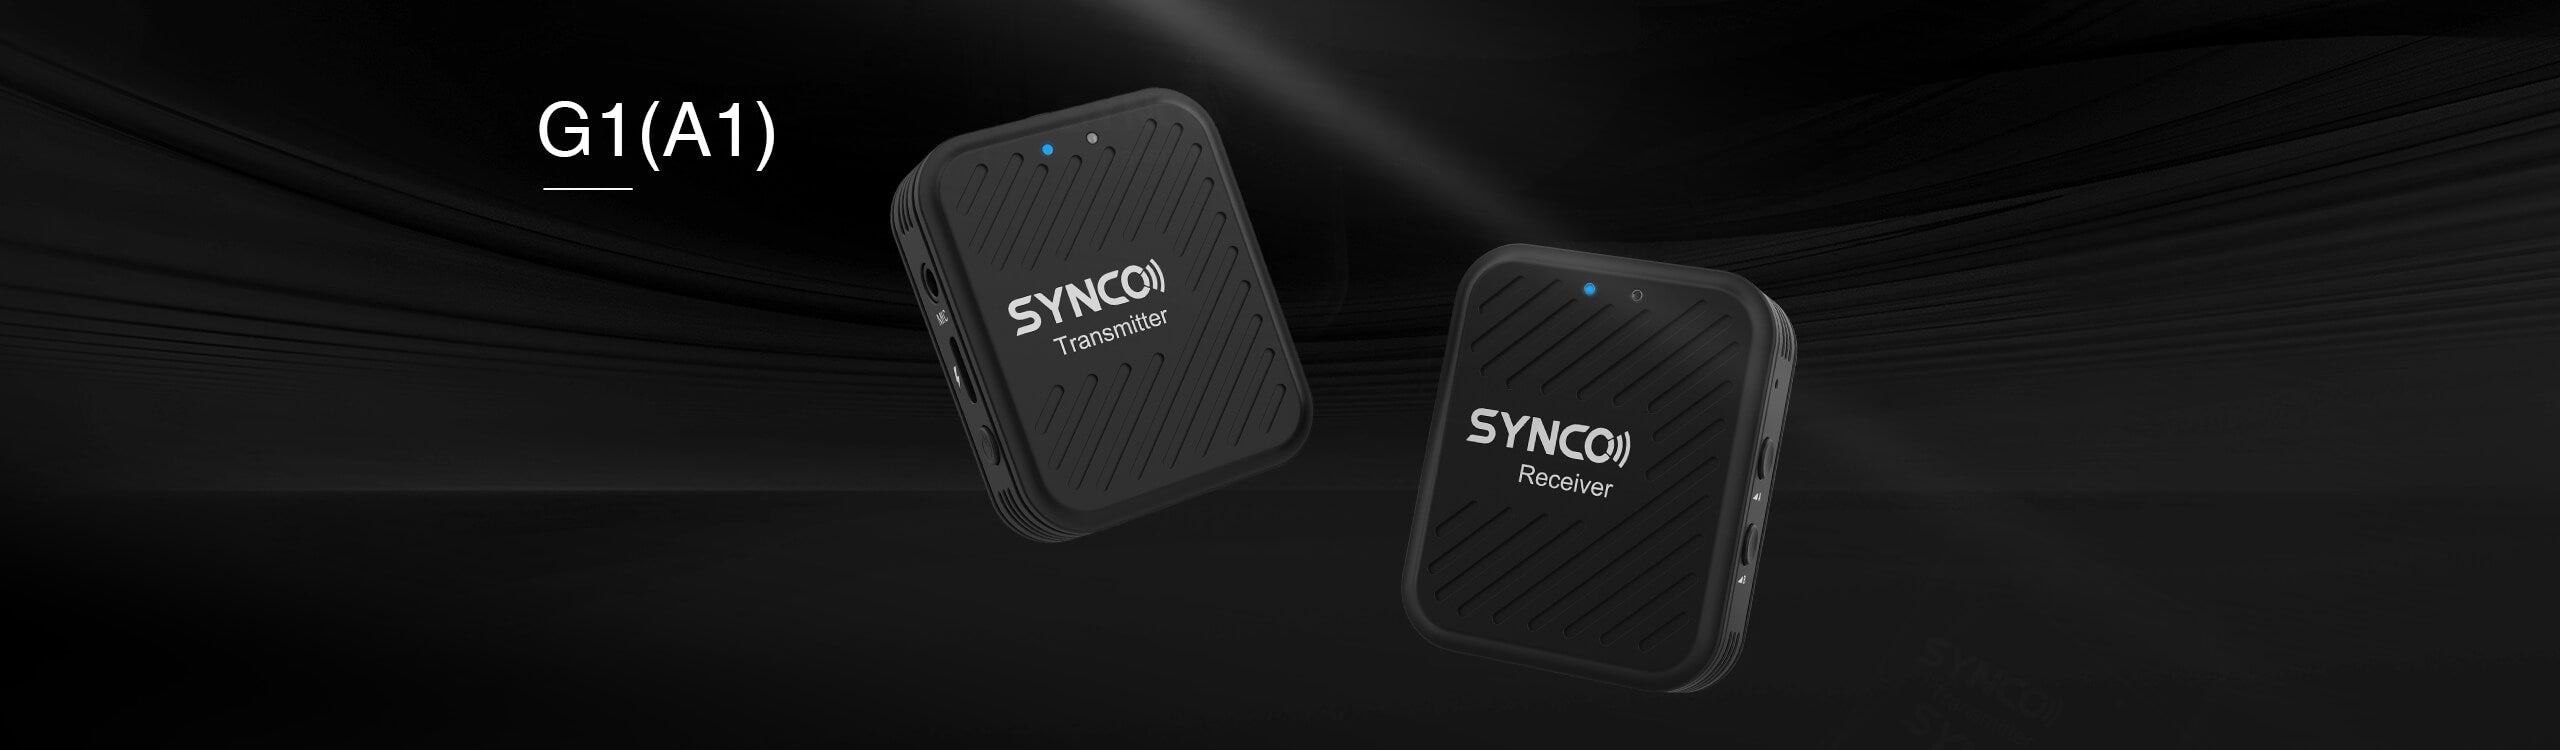 SYNCO G1(A1) wireless clip on microphone includes a transmitter and a receiver. It comes in pink, white, grey, and black colors.